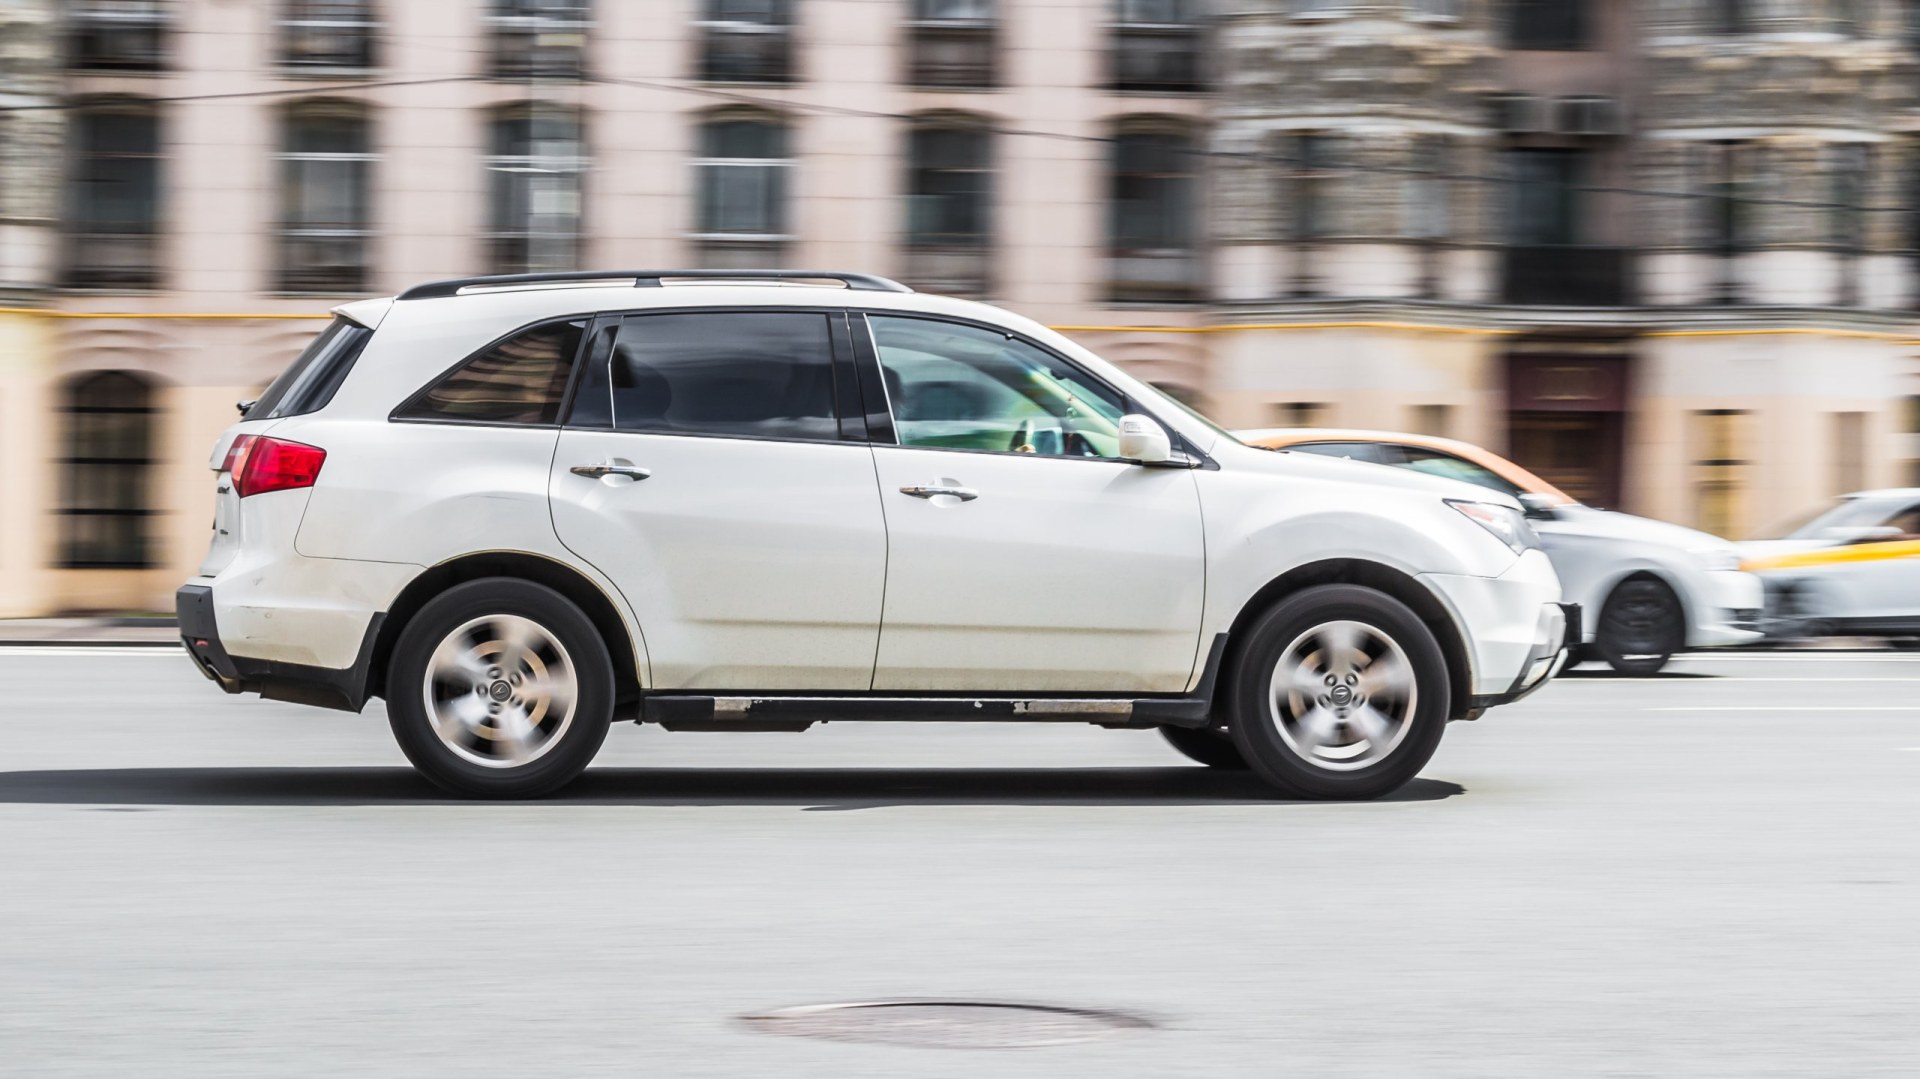 2011 Acura MDX  in motion on city highway road